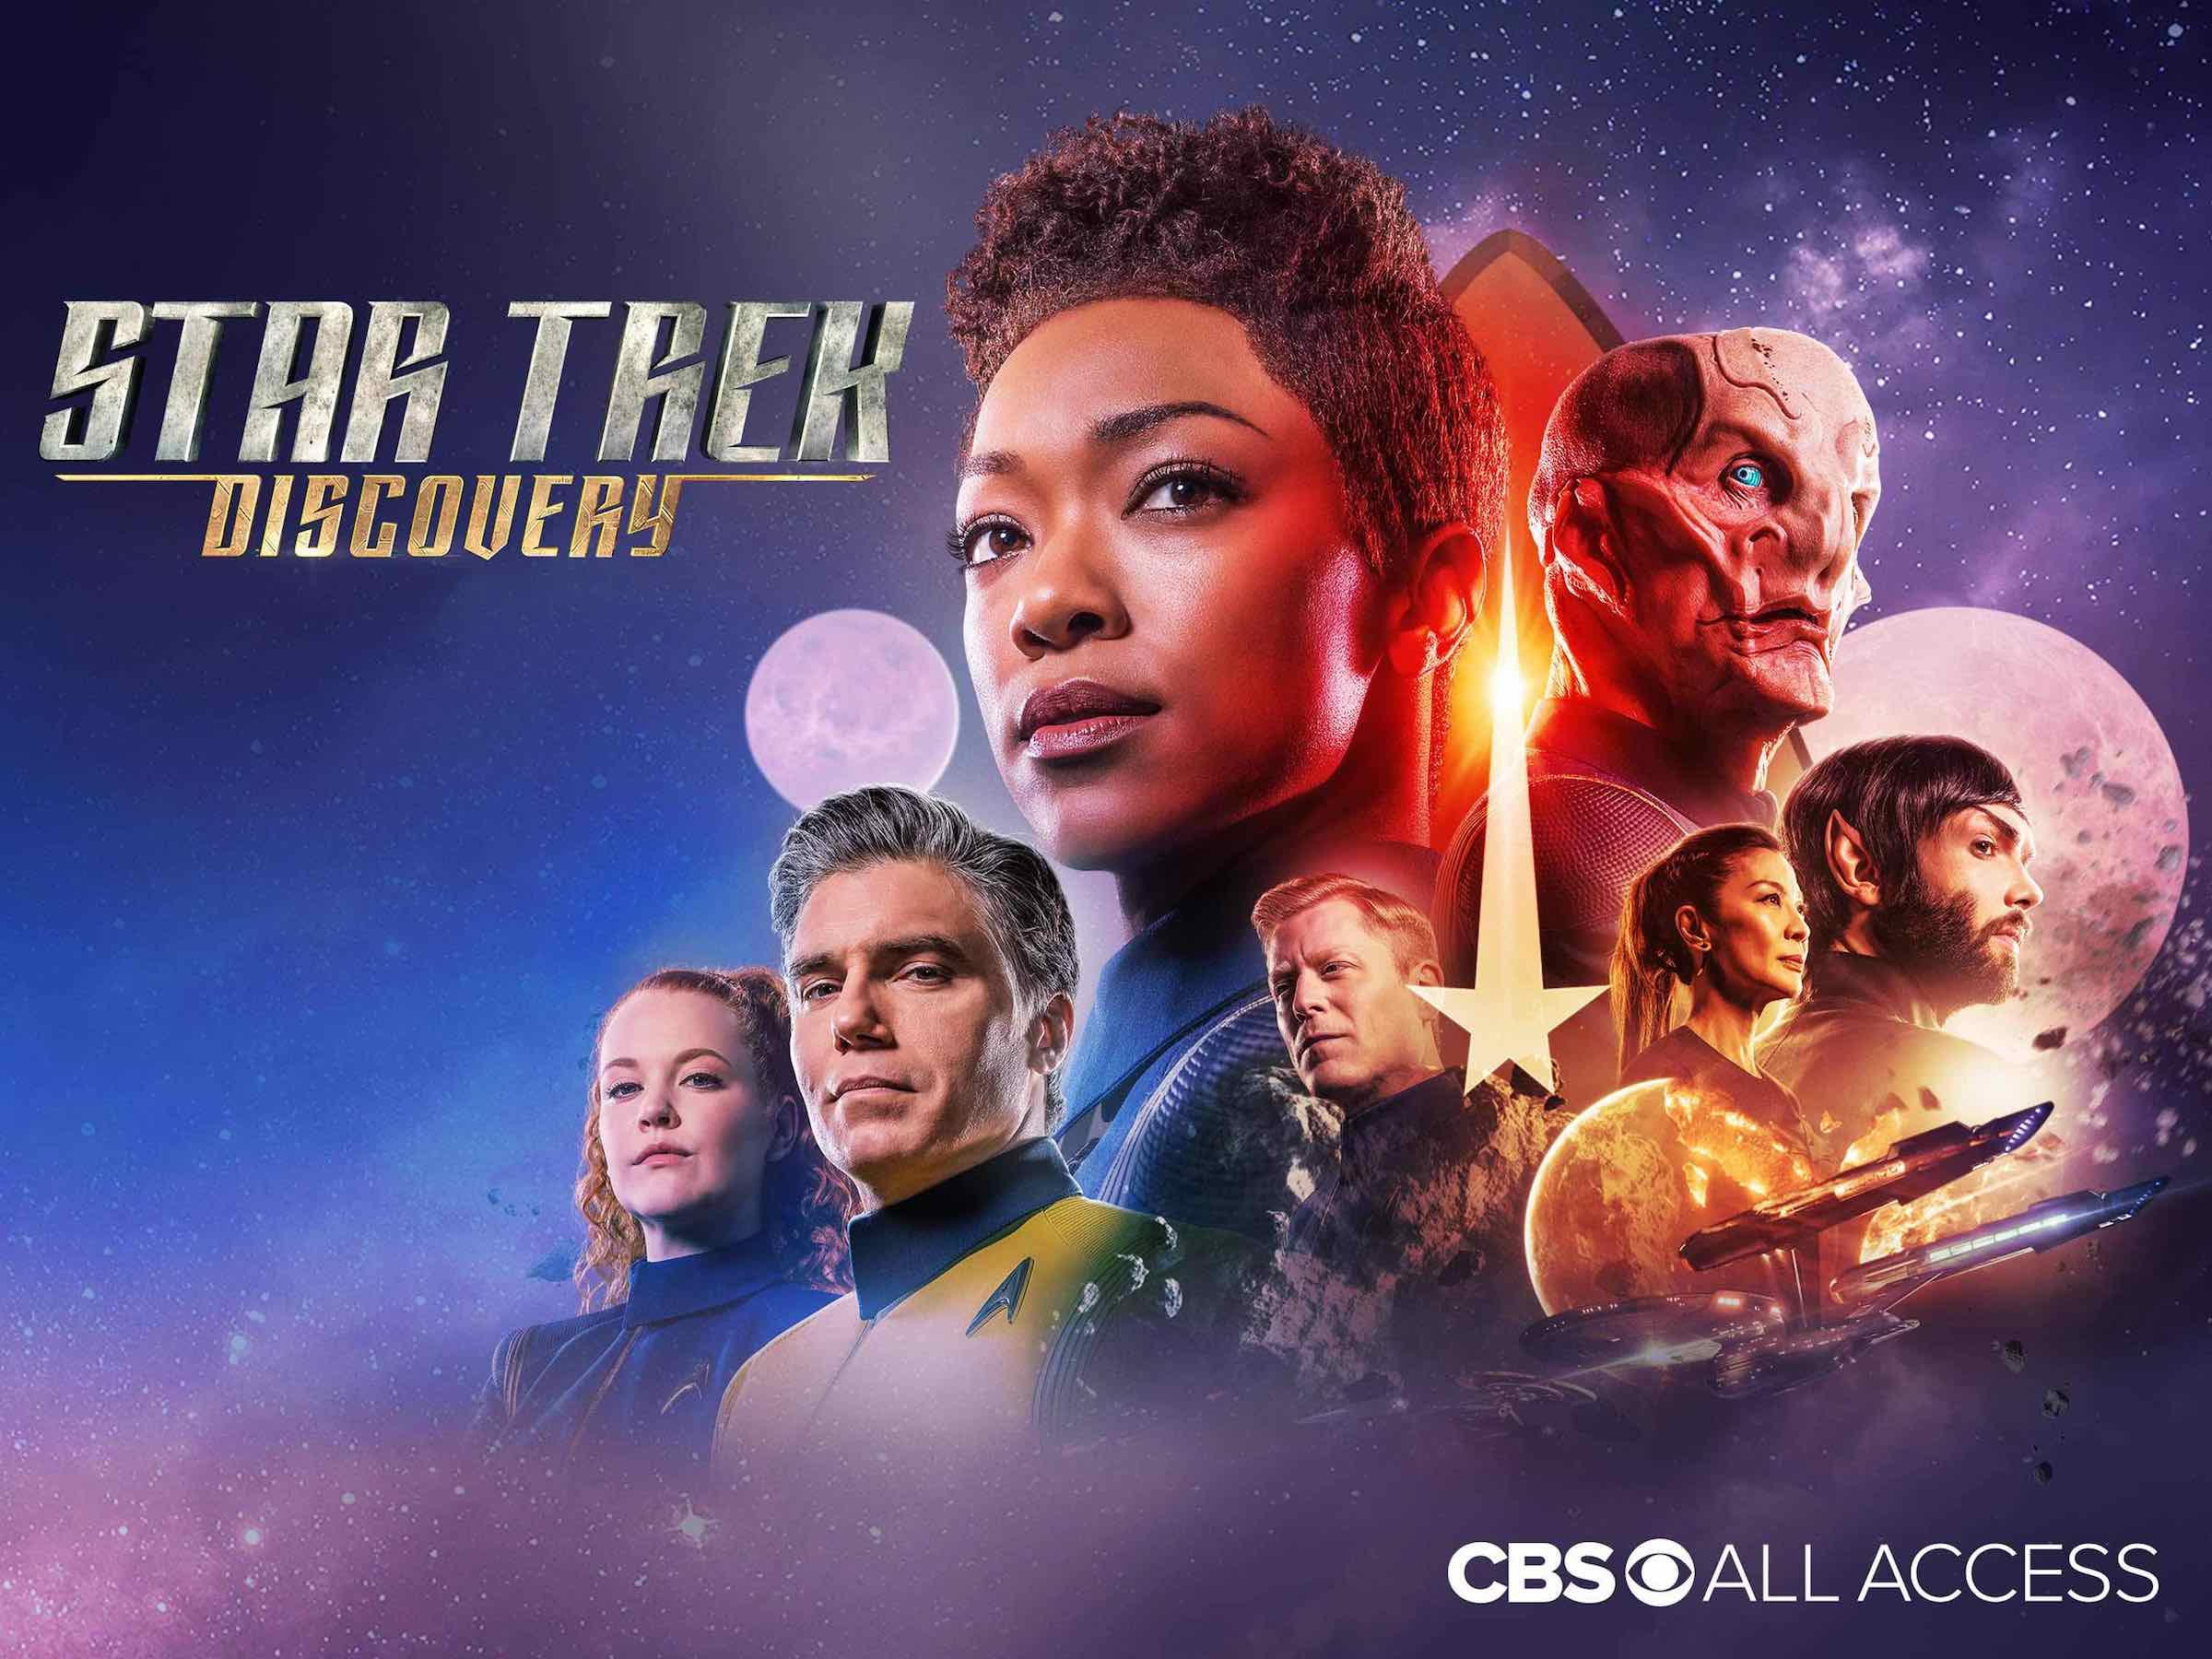 'Star Trek: Discovery' can boldly go . . . to the front of this list for Best Streaming Series in Film Daily's Bingewatch Awards.